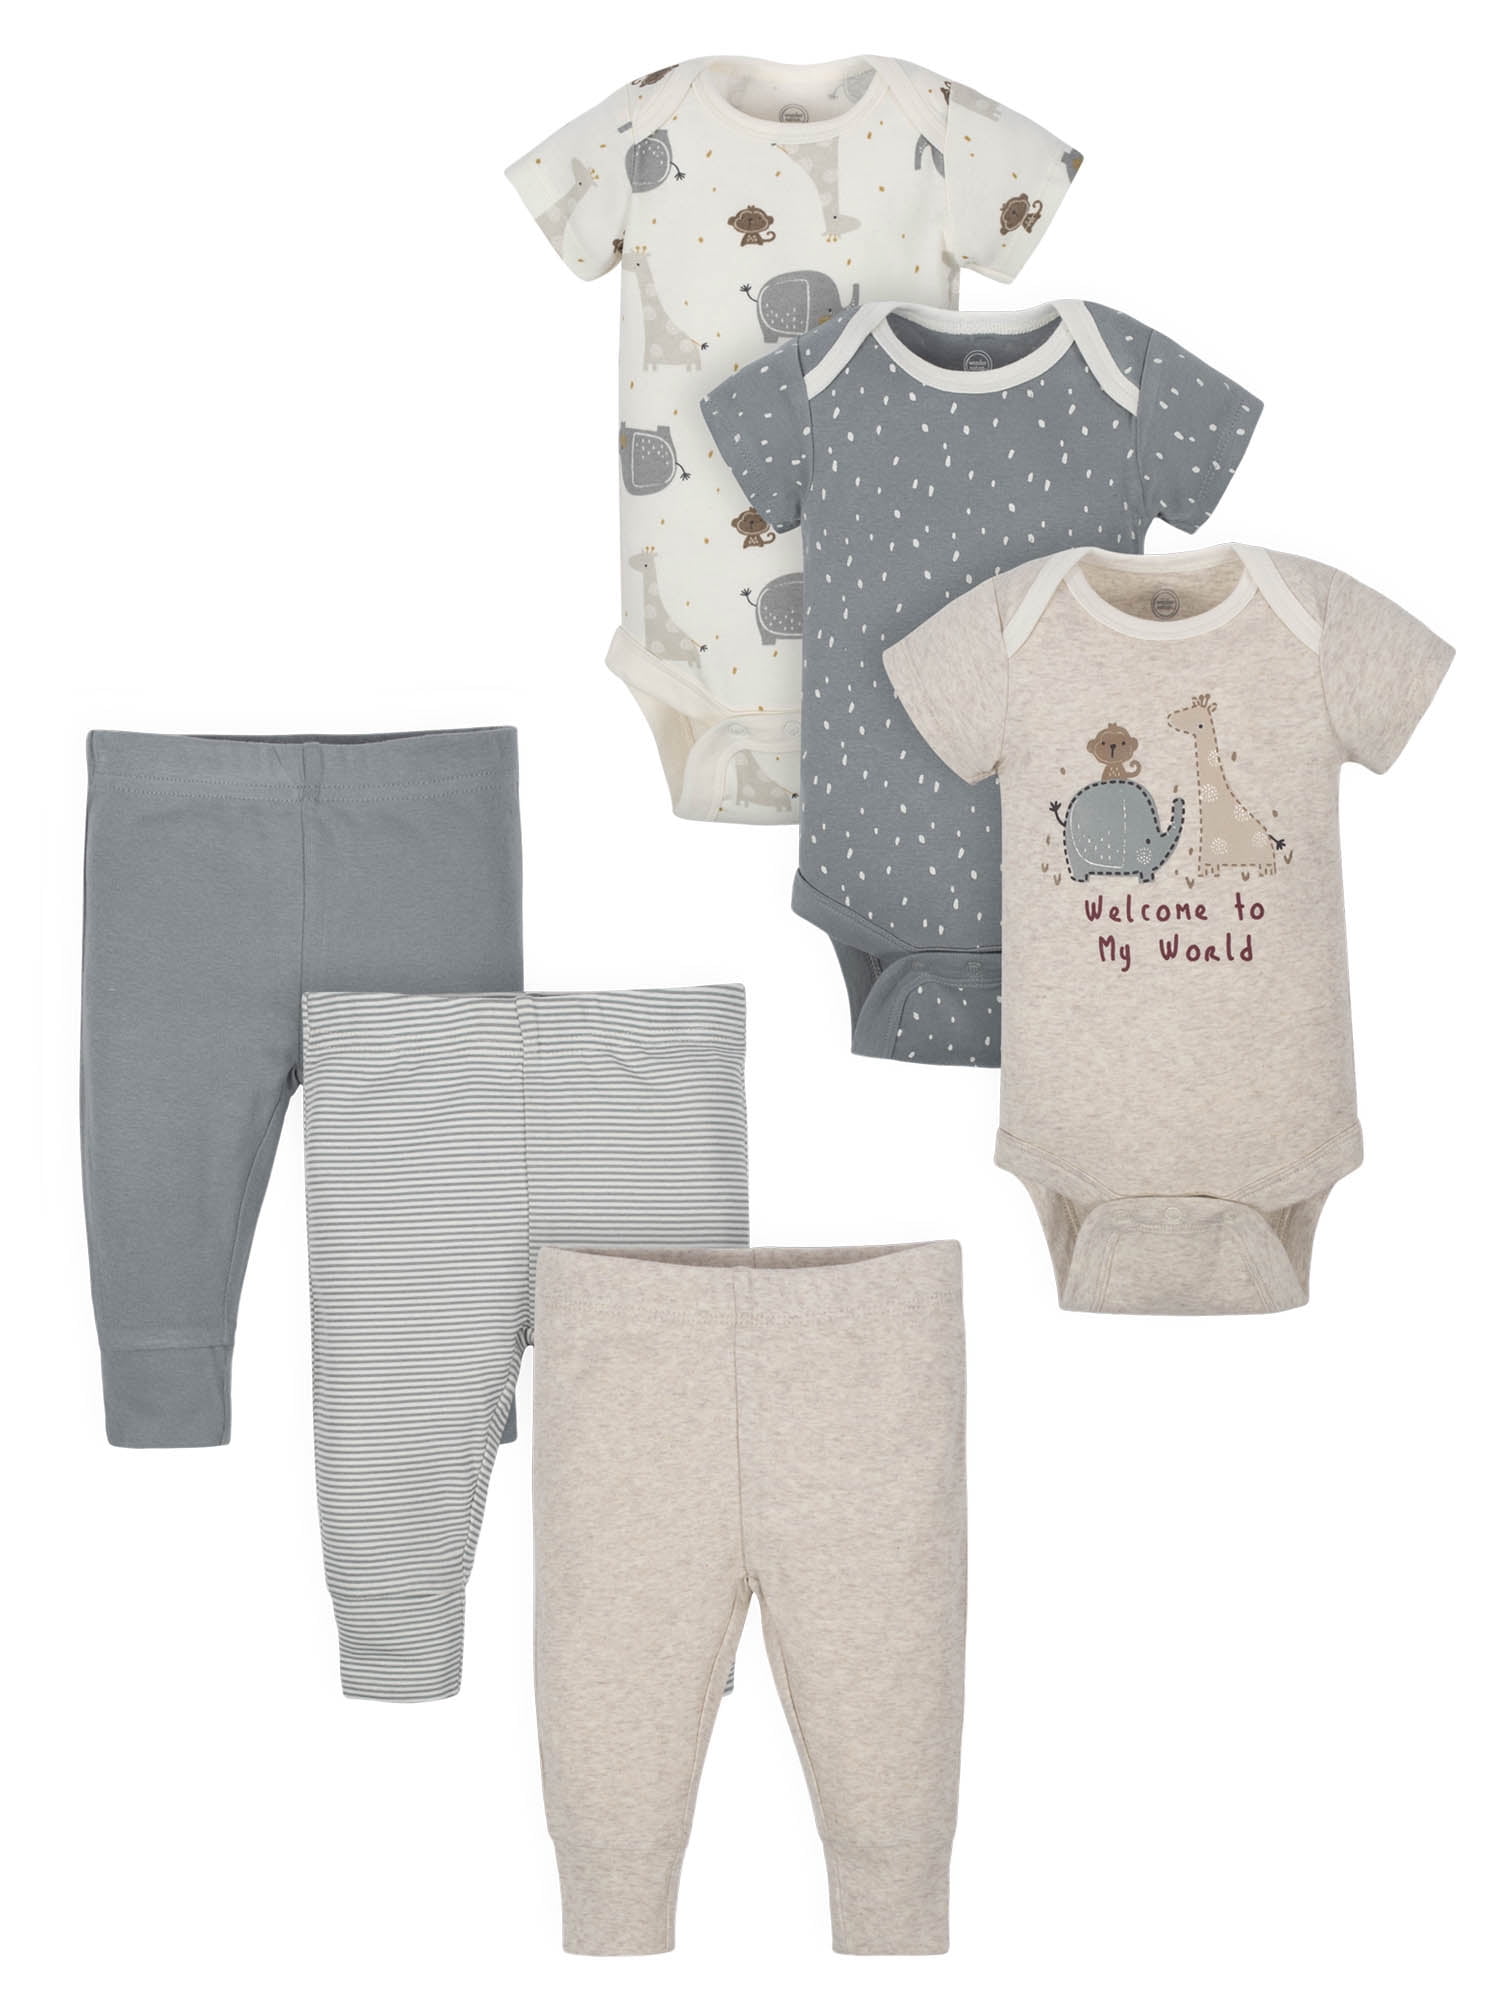 6-Piece Wonder Nation Baby Boys' or Girls' Short-Sleeve Bodysuit and Pants Gift Set $10  + Free S&H w/ Walmart+ or $35+